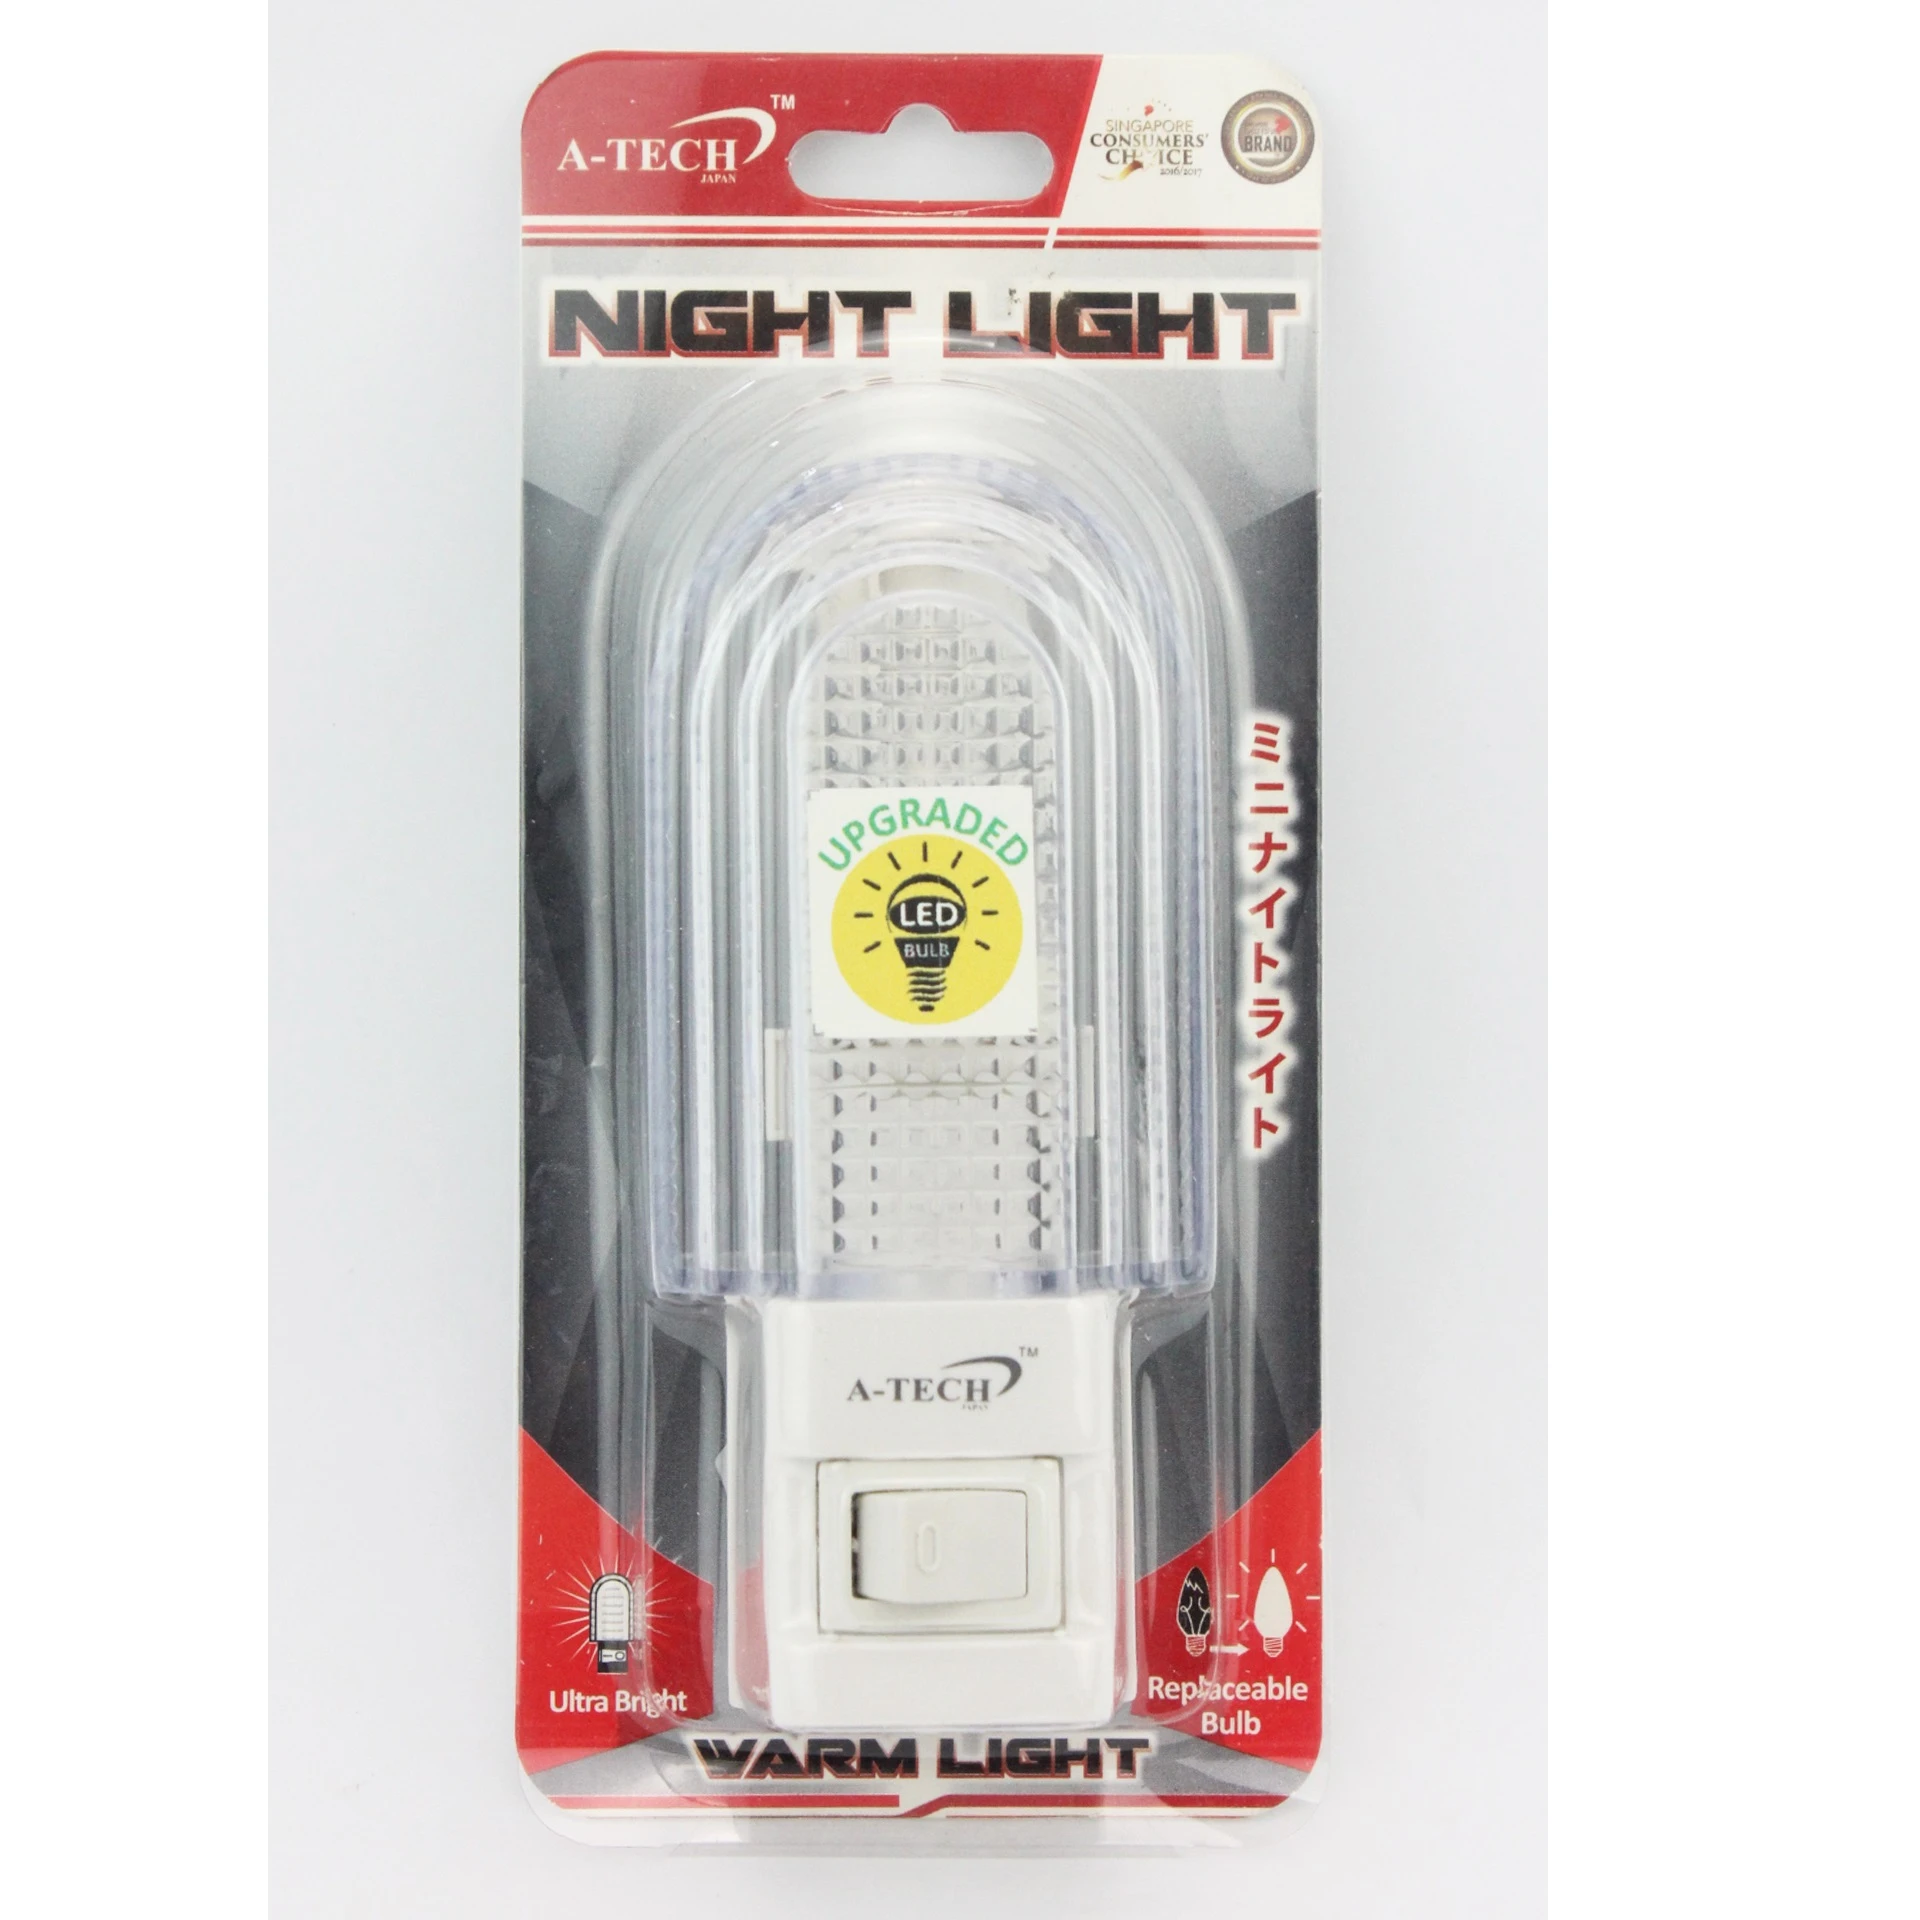 Modern Night Lights Led Night Lamp (Replaceable Bulb) With 6500K (day light) and 4500K (Warm white) Lighting Tone